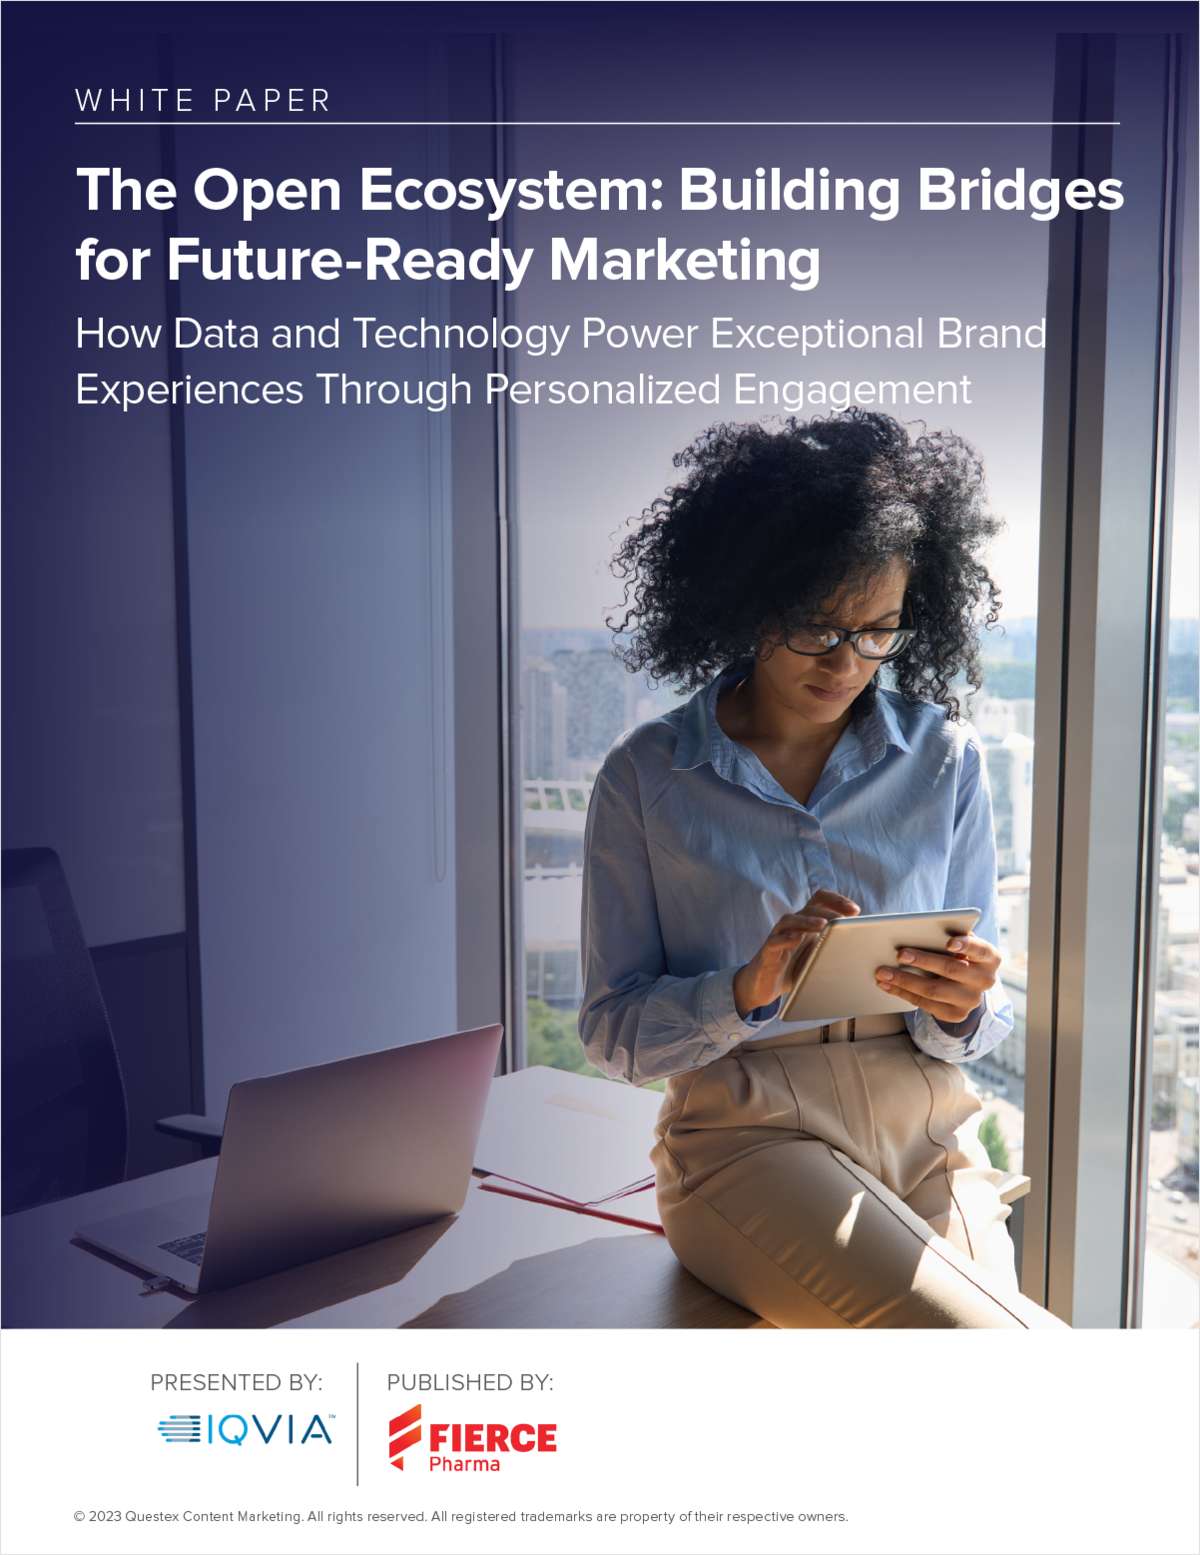 The Open Ecosystem: Building Bridges for Future-Ready Marketing